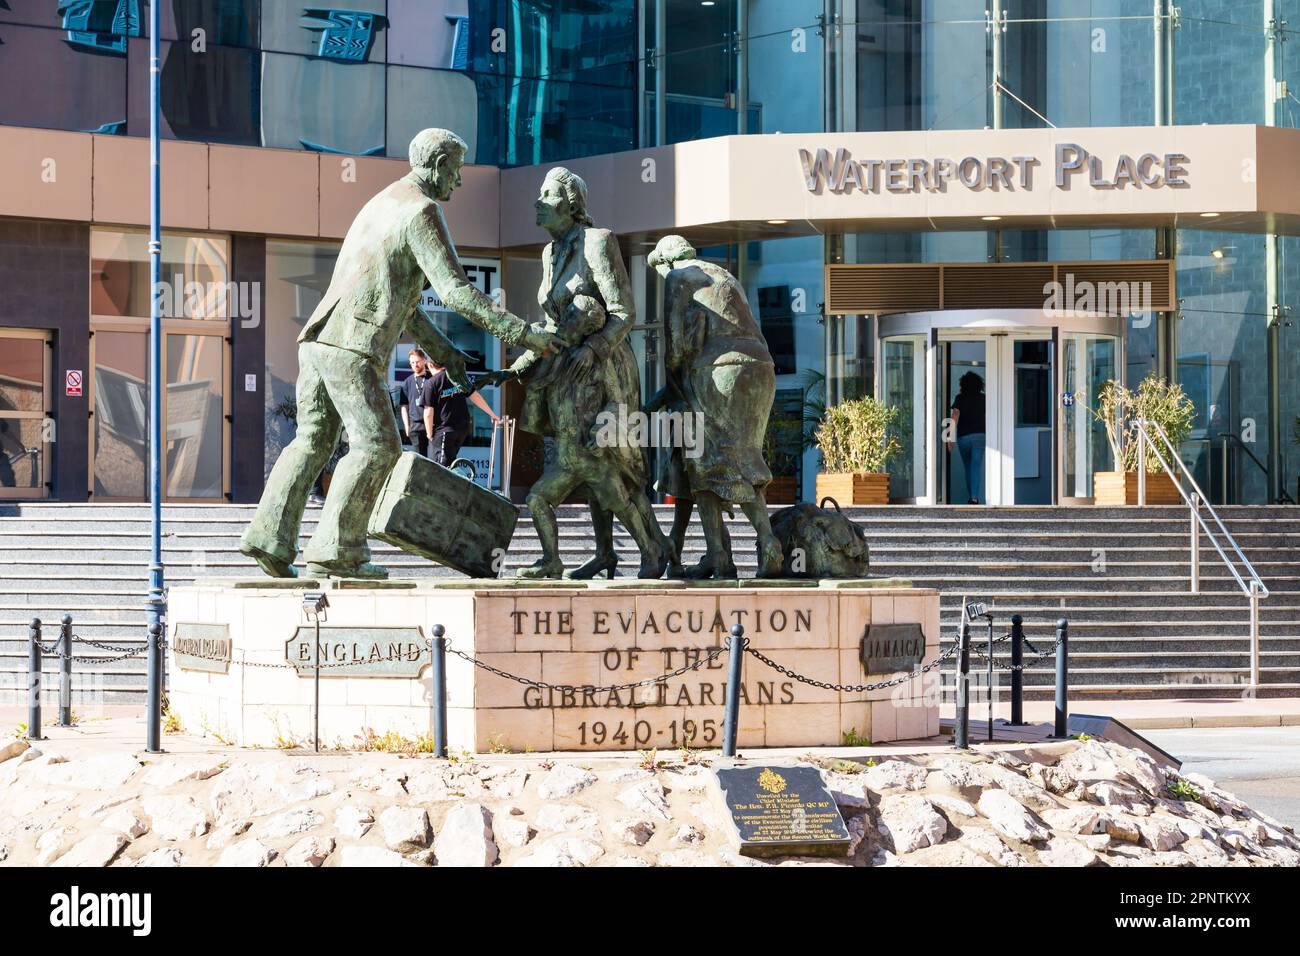 Evacuation of the Gibraltarians bronze statue by Jill Cowie Sanders. North Mole Road roundabout. In front of Waterport Place building. The British Ove Stock Photo